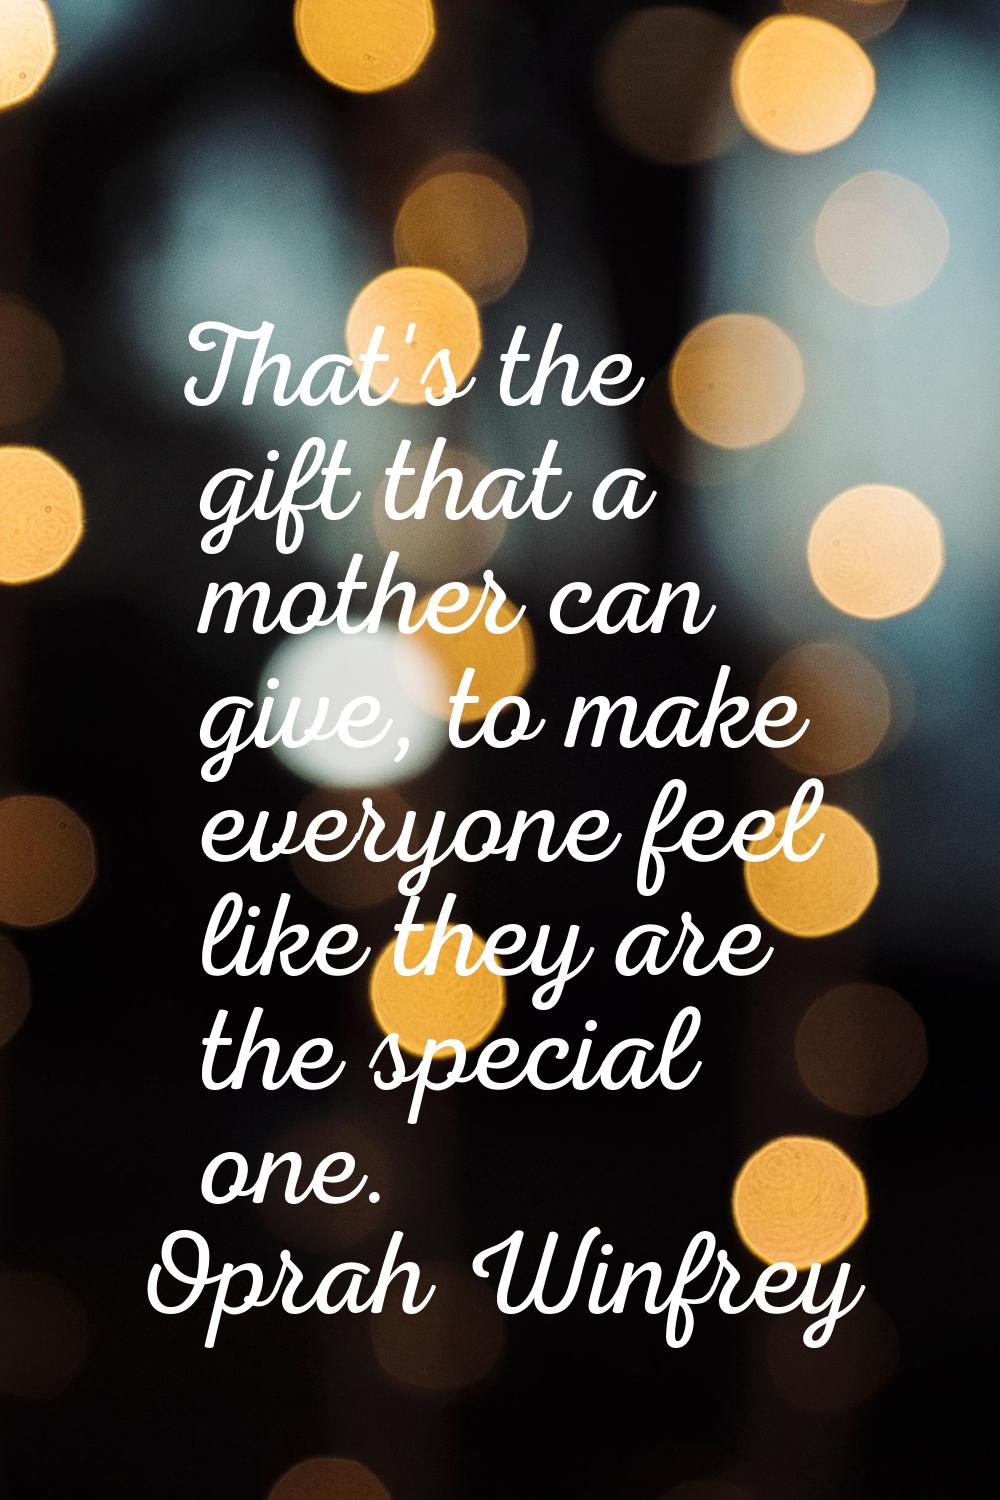 That's the gift that a mother can give, to make everyone feel like they are the special one.